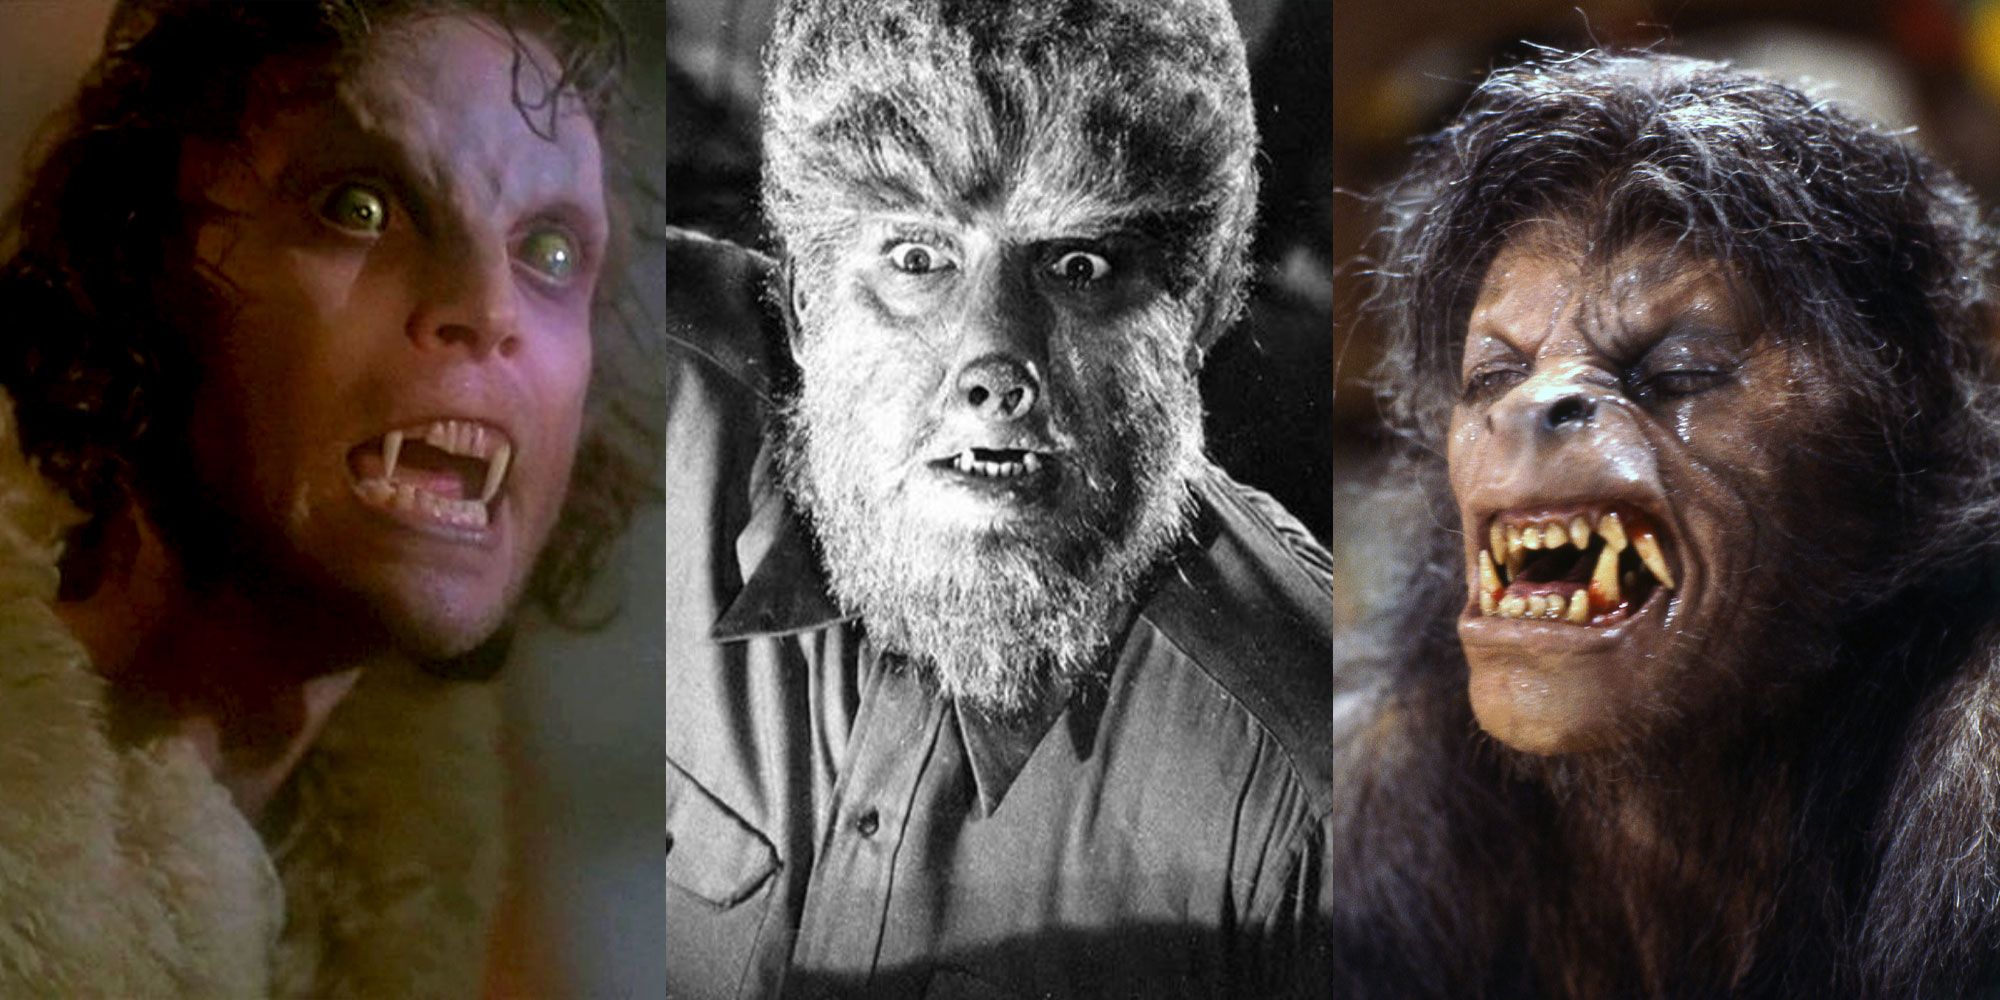 A split image of werewolves from different movies.